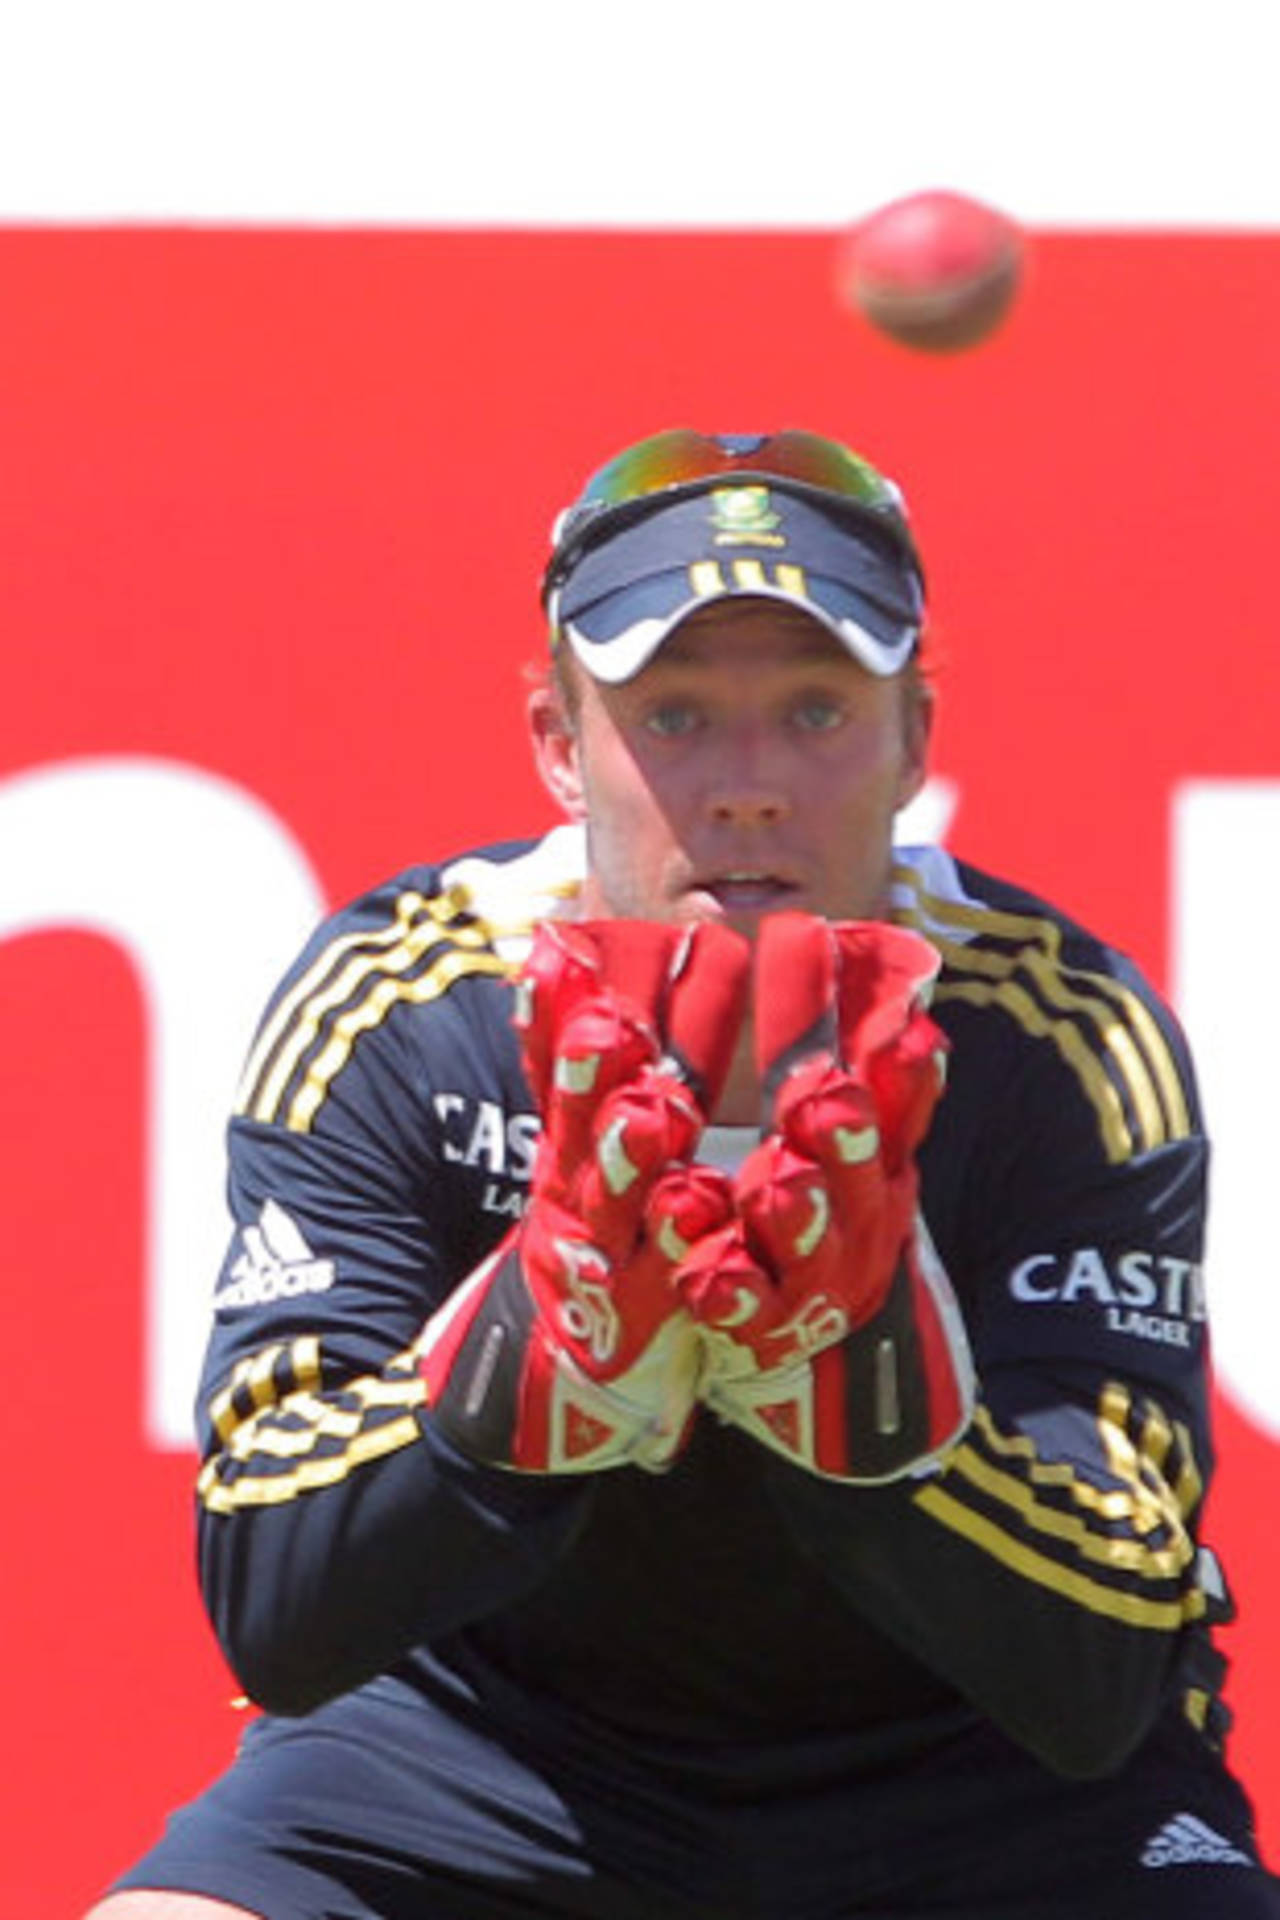 AB de Villiers works with the gloves, Cape Town, December 29, 2012